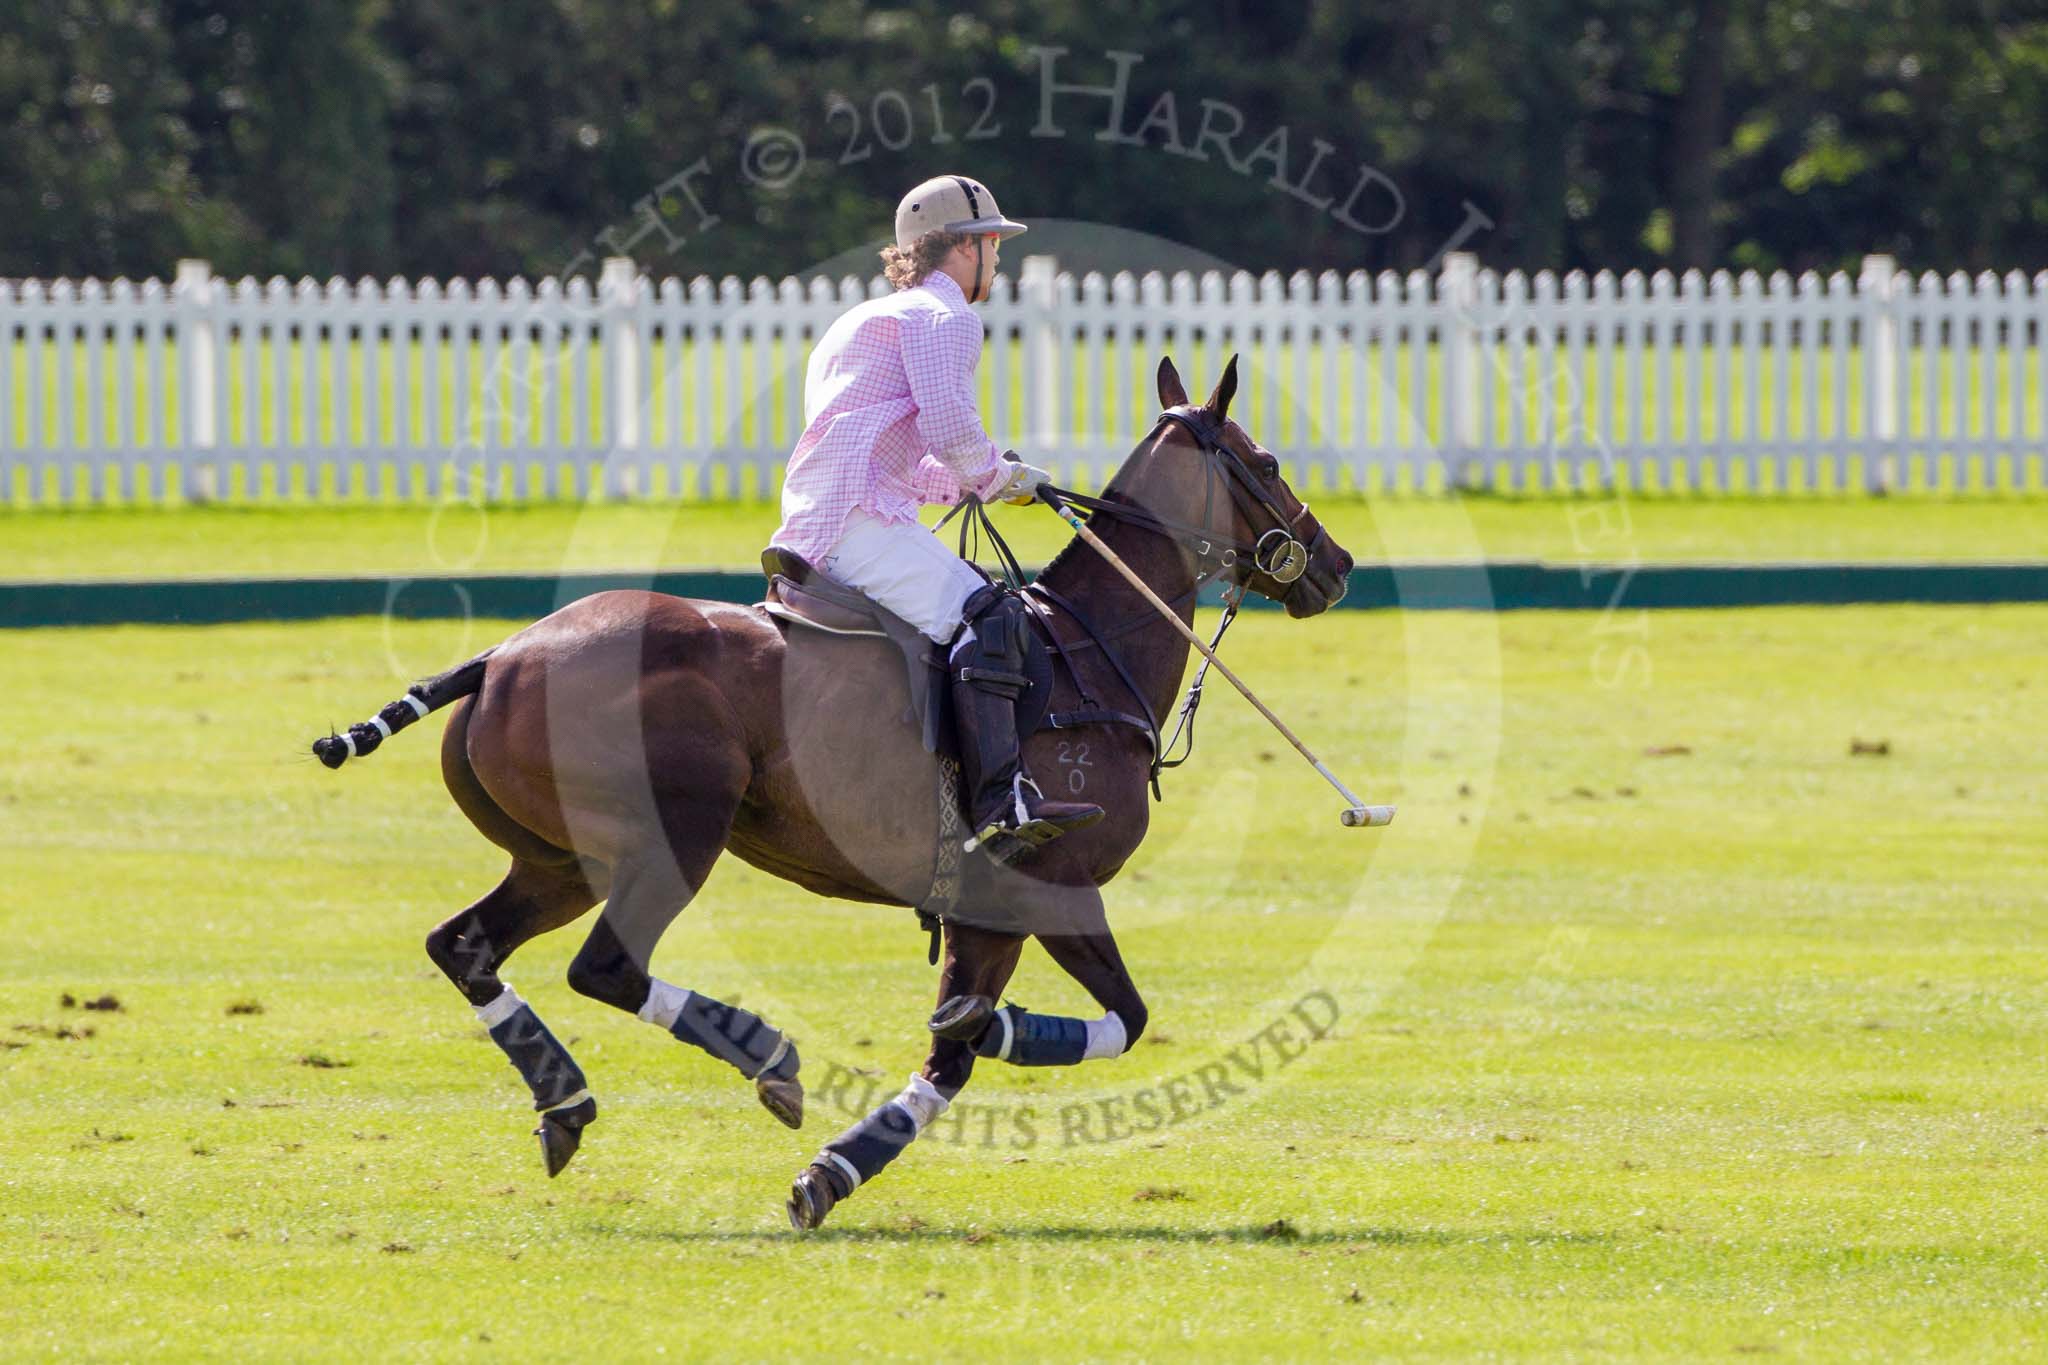 7th Heritage Polo Cup finals: Nico Talamoni Emerging Switzerland wearing T.M.Lewin Check Shirt in pink & pink silk tie..
Hurtwood Park Polo Club,
Ewhurst Green,
Surrey,
United Kingdom,
on 05 August 2012 at 15:37, image #180